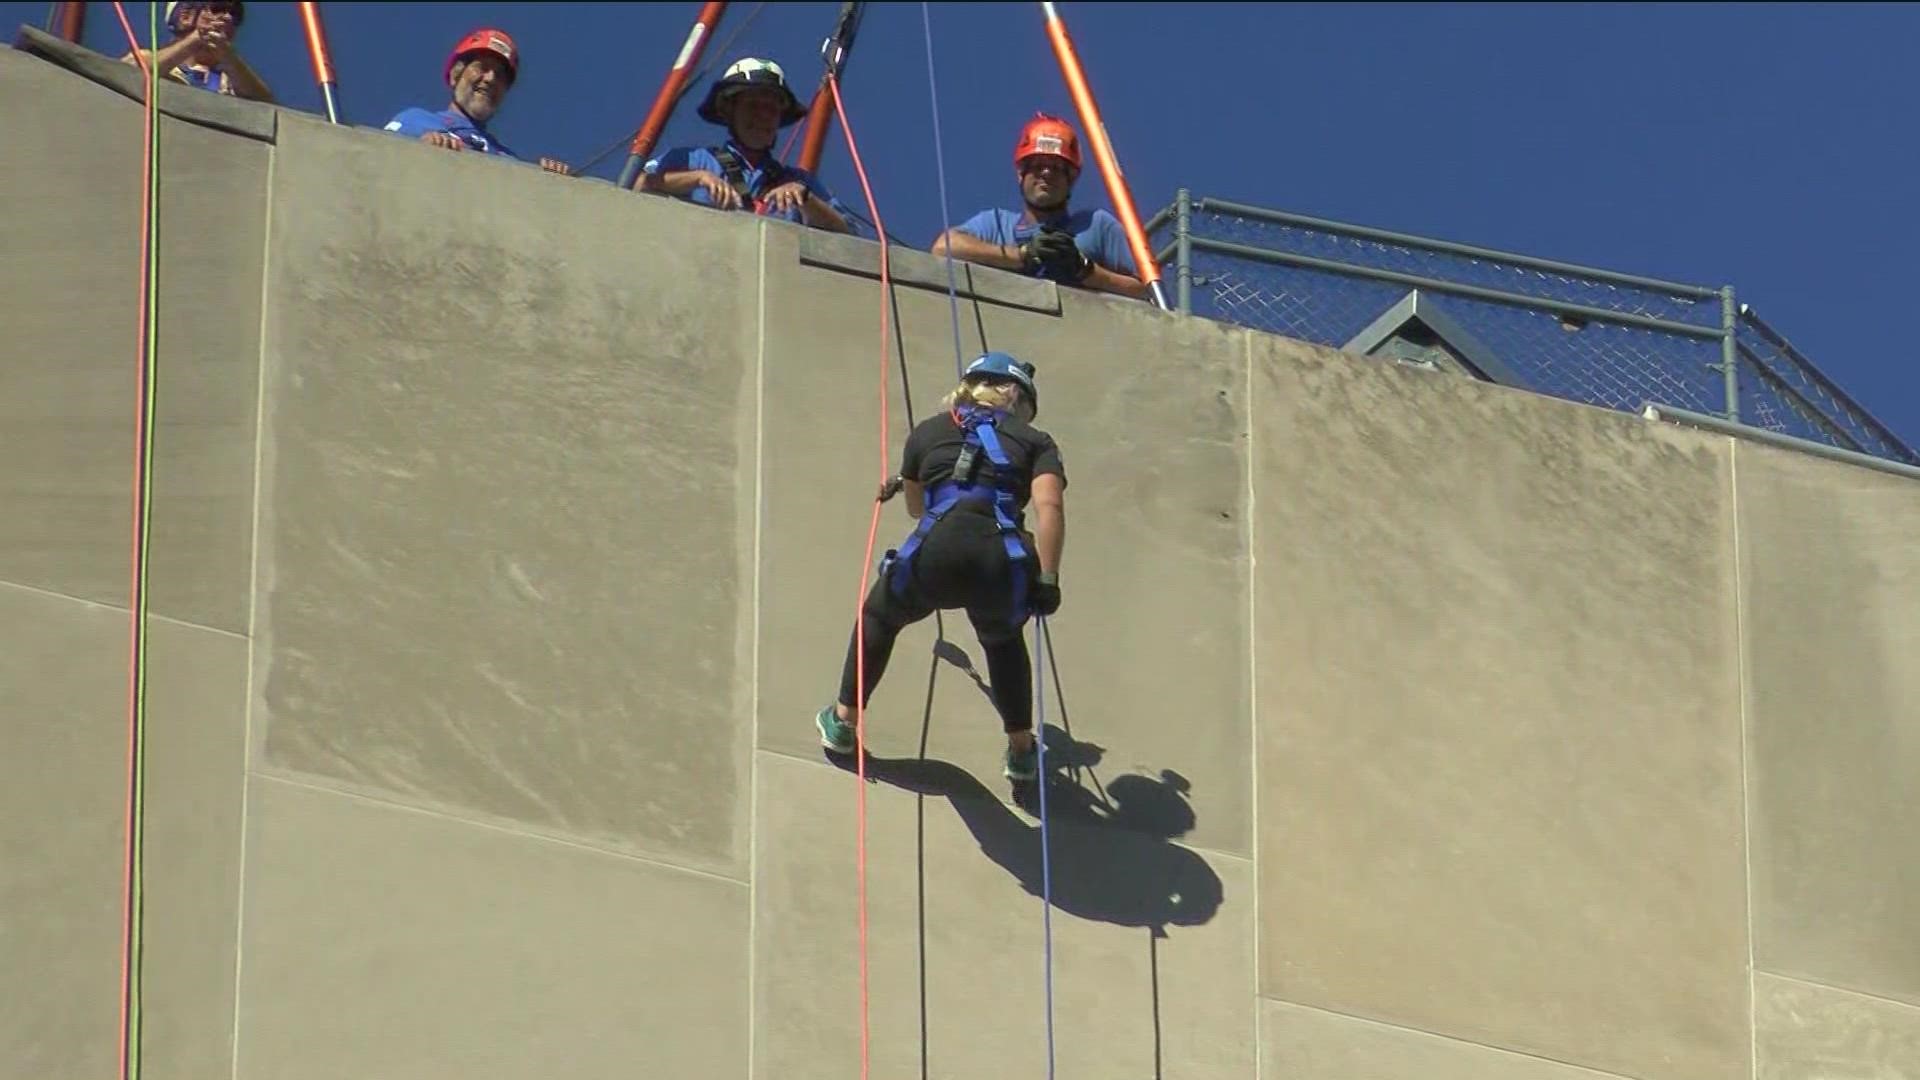 The yearly event, 'Over the Edge for Victory,' raises money for The Victory Center, which provides non-medical care to cancer patients and survivors for free.